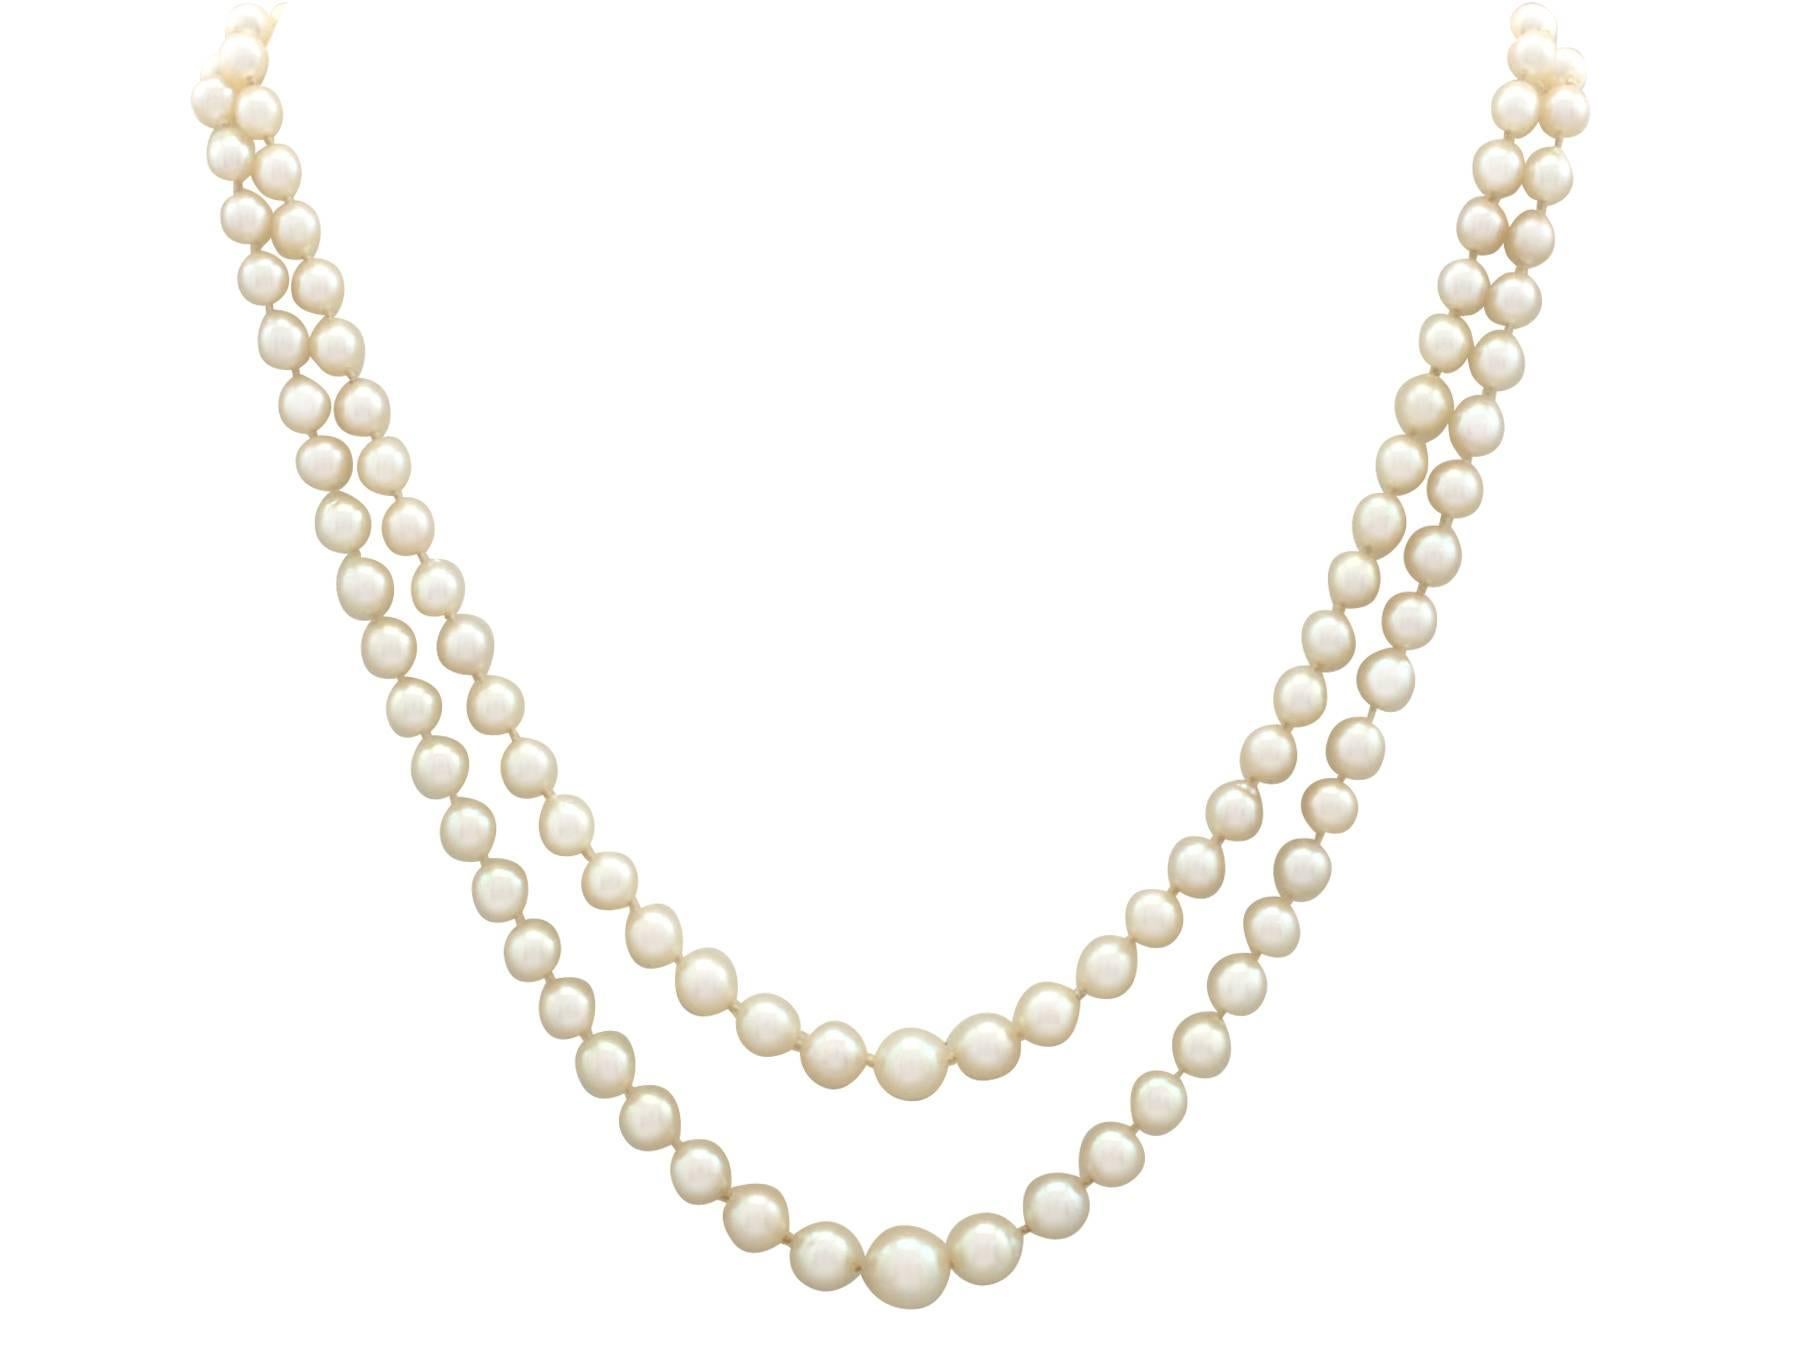 An impressive double strand pearl necklace with imitation stone, 0.43 carat diamond and 18 karat white gold, platinum set clasp; part of our diverse pearl jewelry collections.

This fine and impressive vintage double strand pearl necklace has been